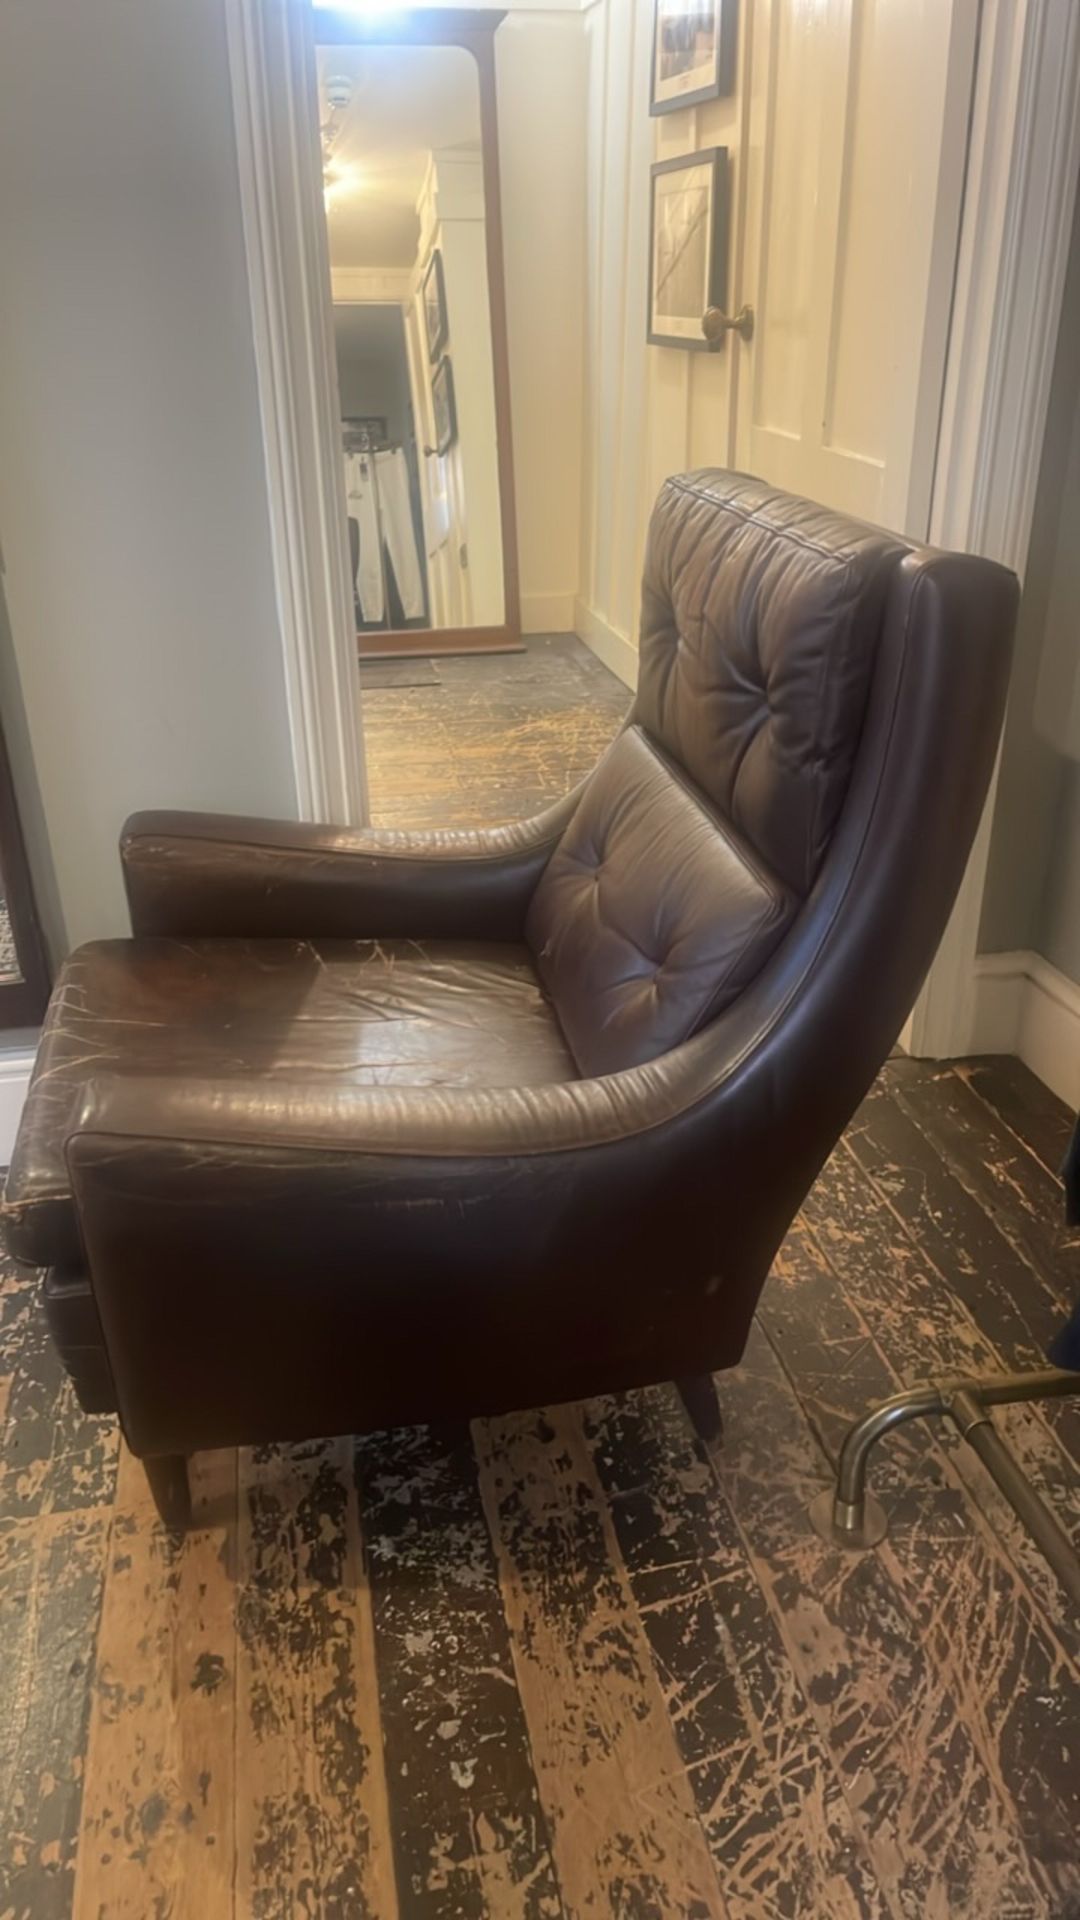 Leather Sitting Chair - Image 3 of 3